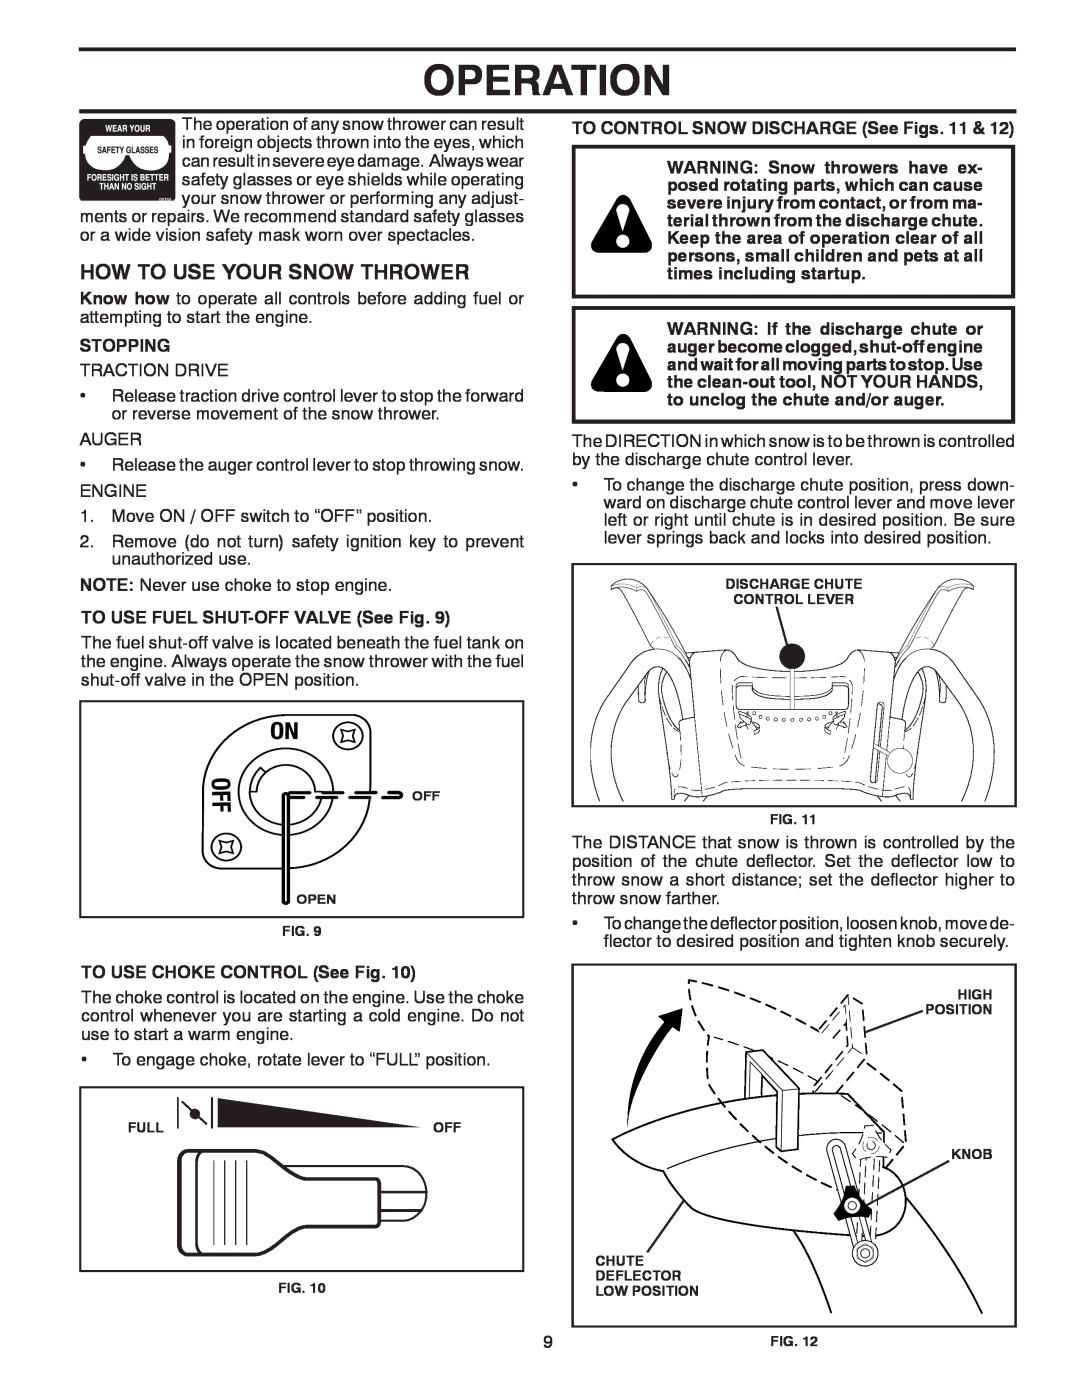 Poulan 96192002901, 428689 owner manual How To Use Your Snow Thrower, Operation, Stopping, TO USE FUEL SHUT-OFFVALVE See Fig 